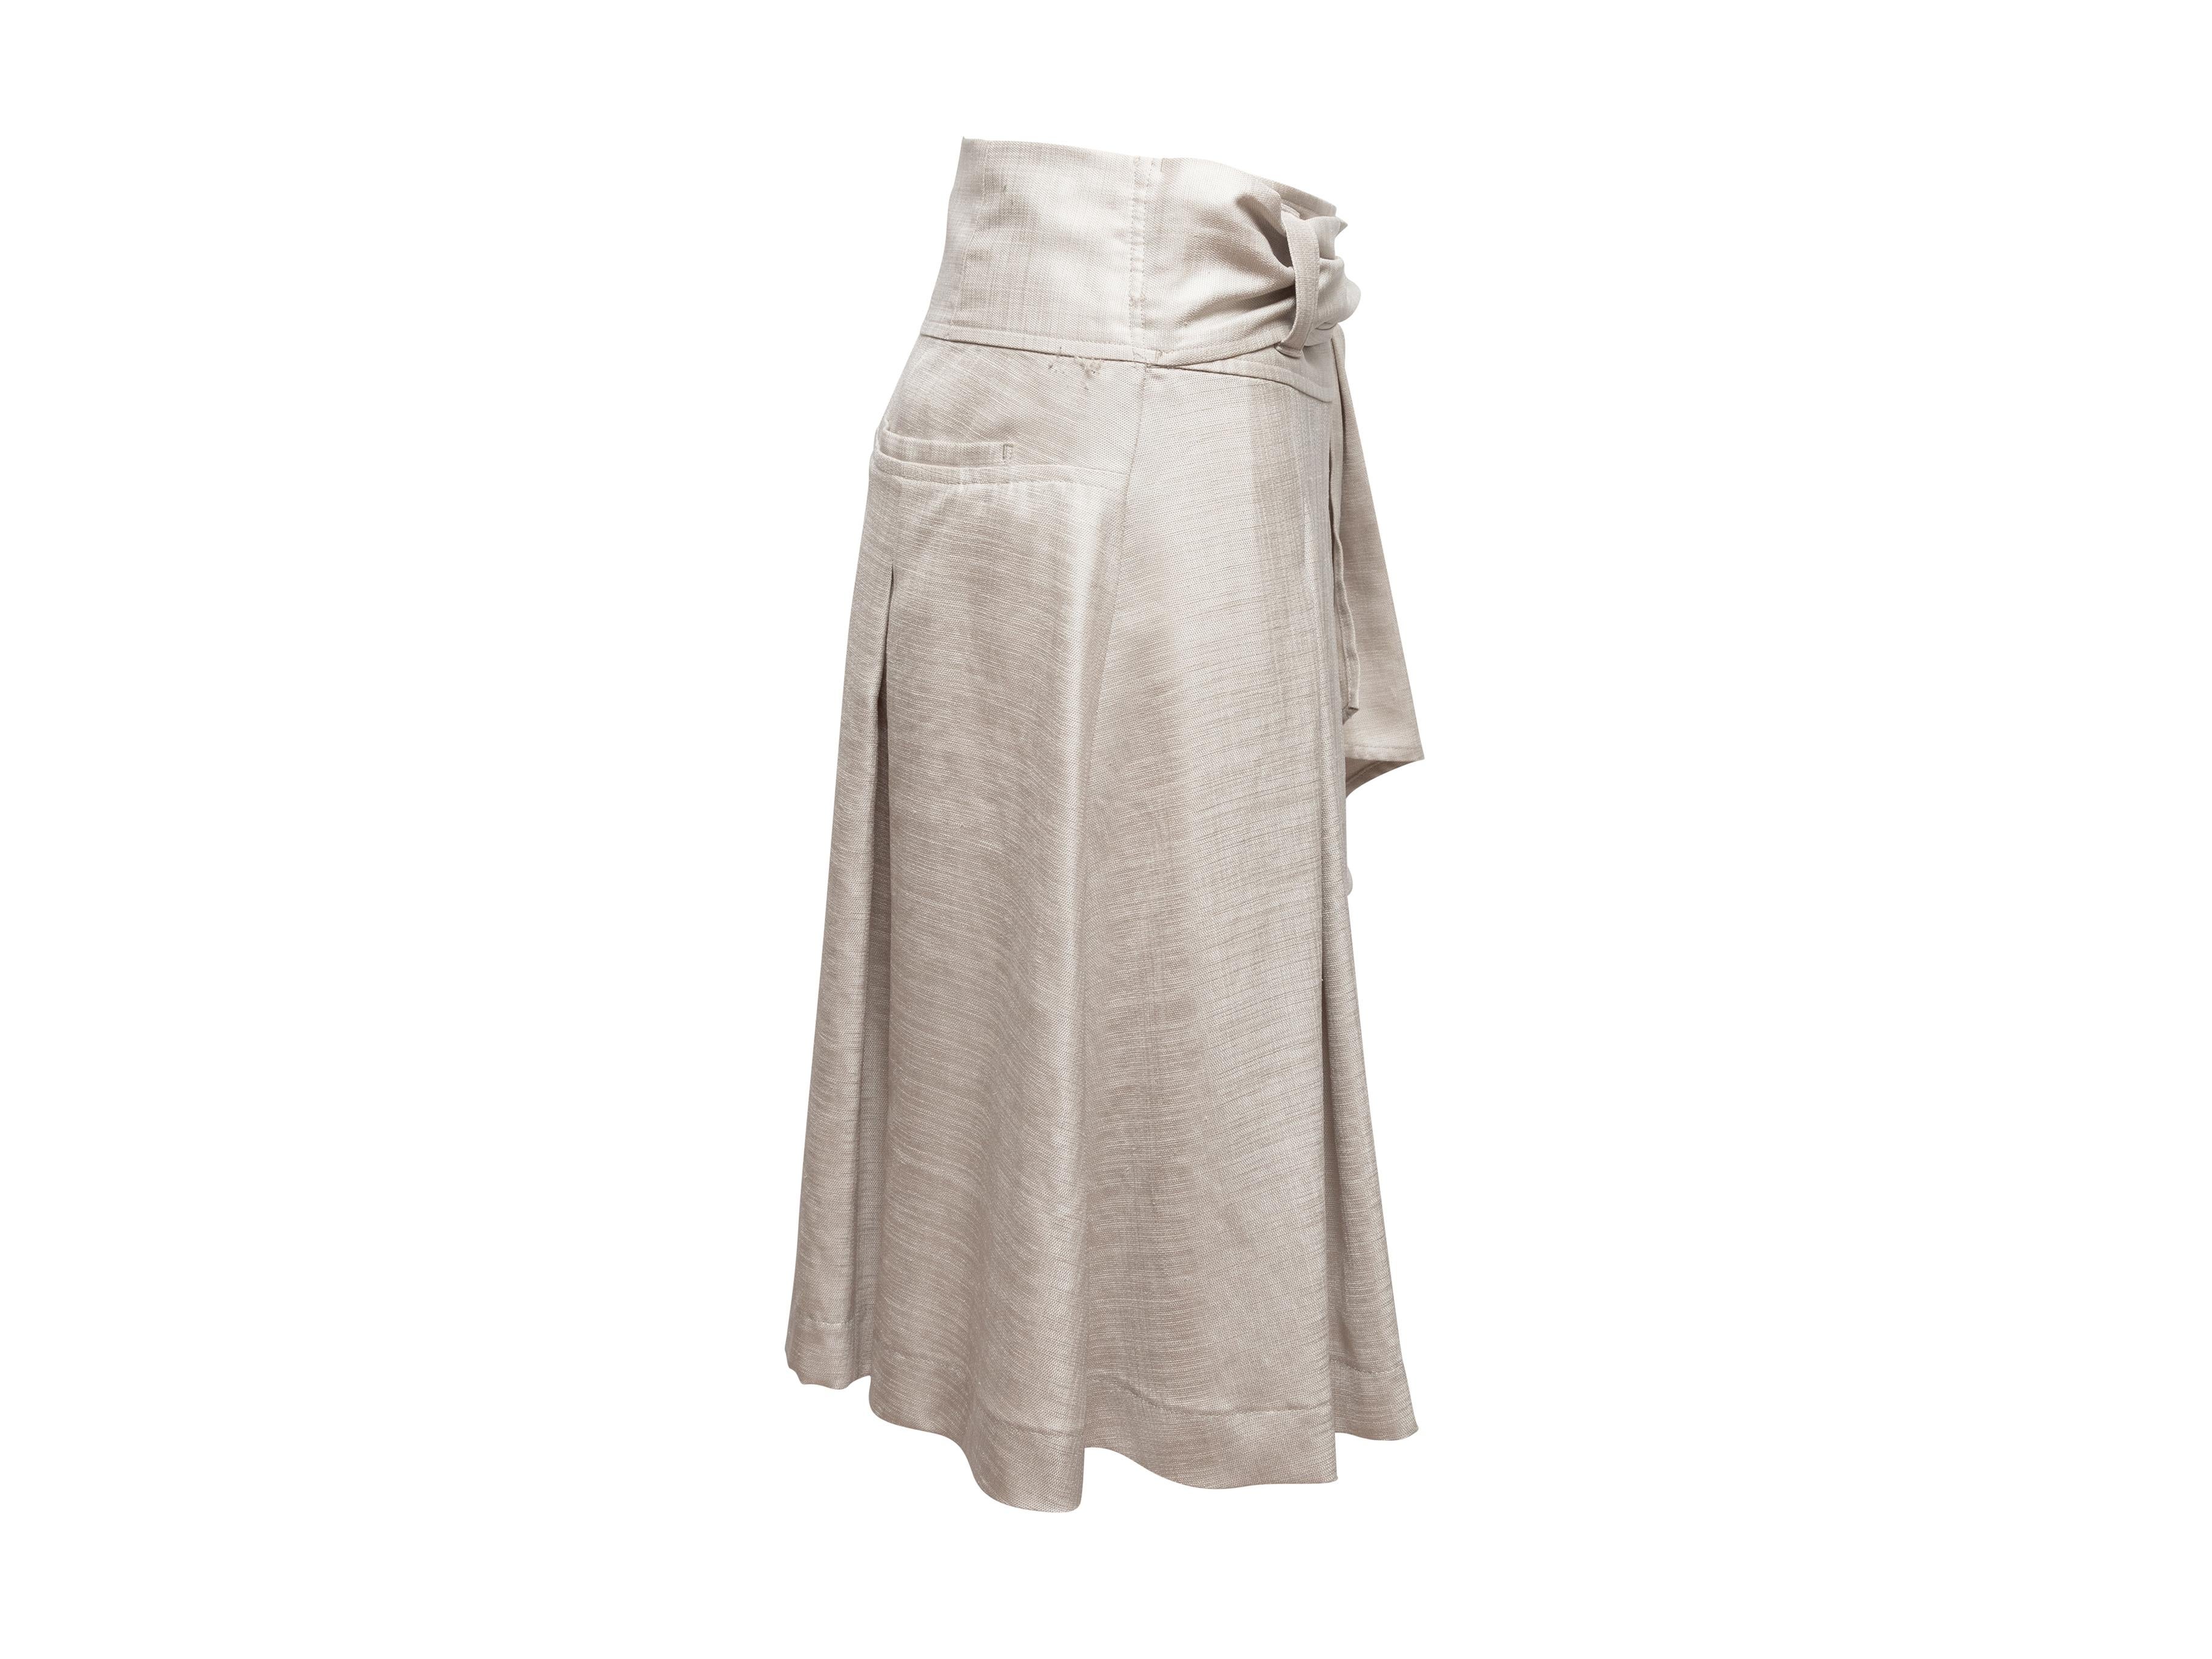 Product Details: Grey linen pleated skirt by Issey Miyake. Dual back packets. Sash tie closure at waist. 27